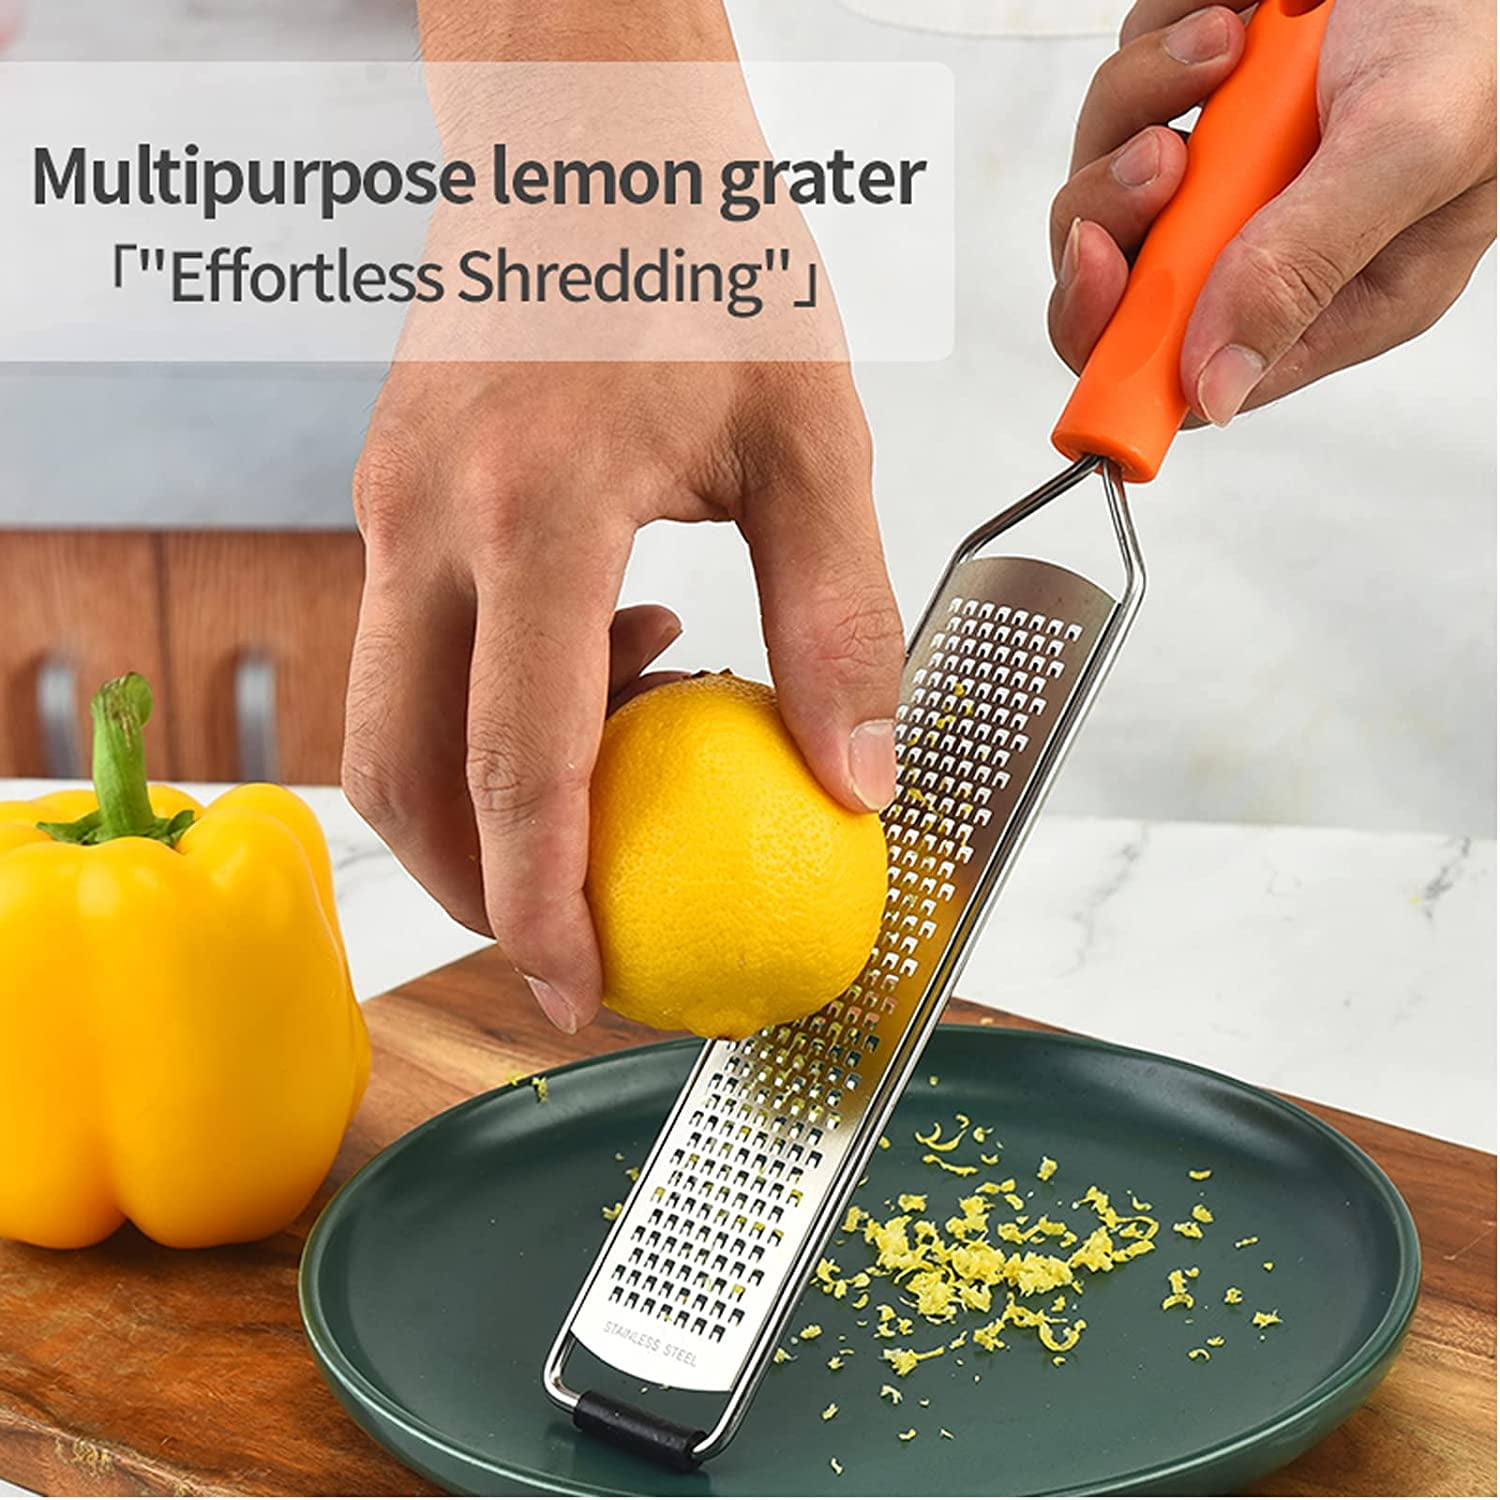 ALLTOP Food Graters for Cheese,Nutmeg,Potato,Ginger and  Garlic,Cirtrus,Hand-held Stainless Steel Zester for Kitchen - Pro  Multi-purpose Gadgets,Set of